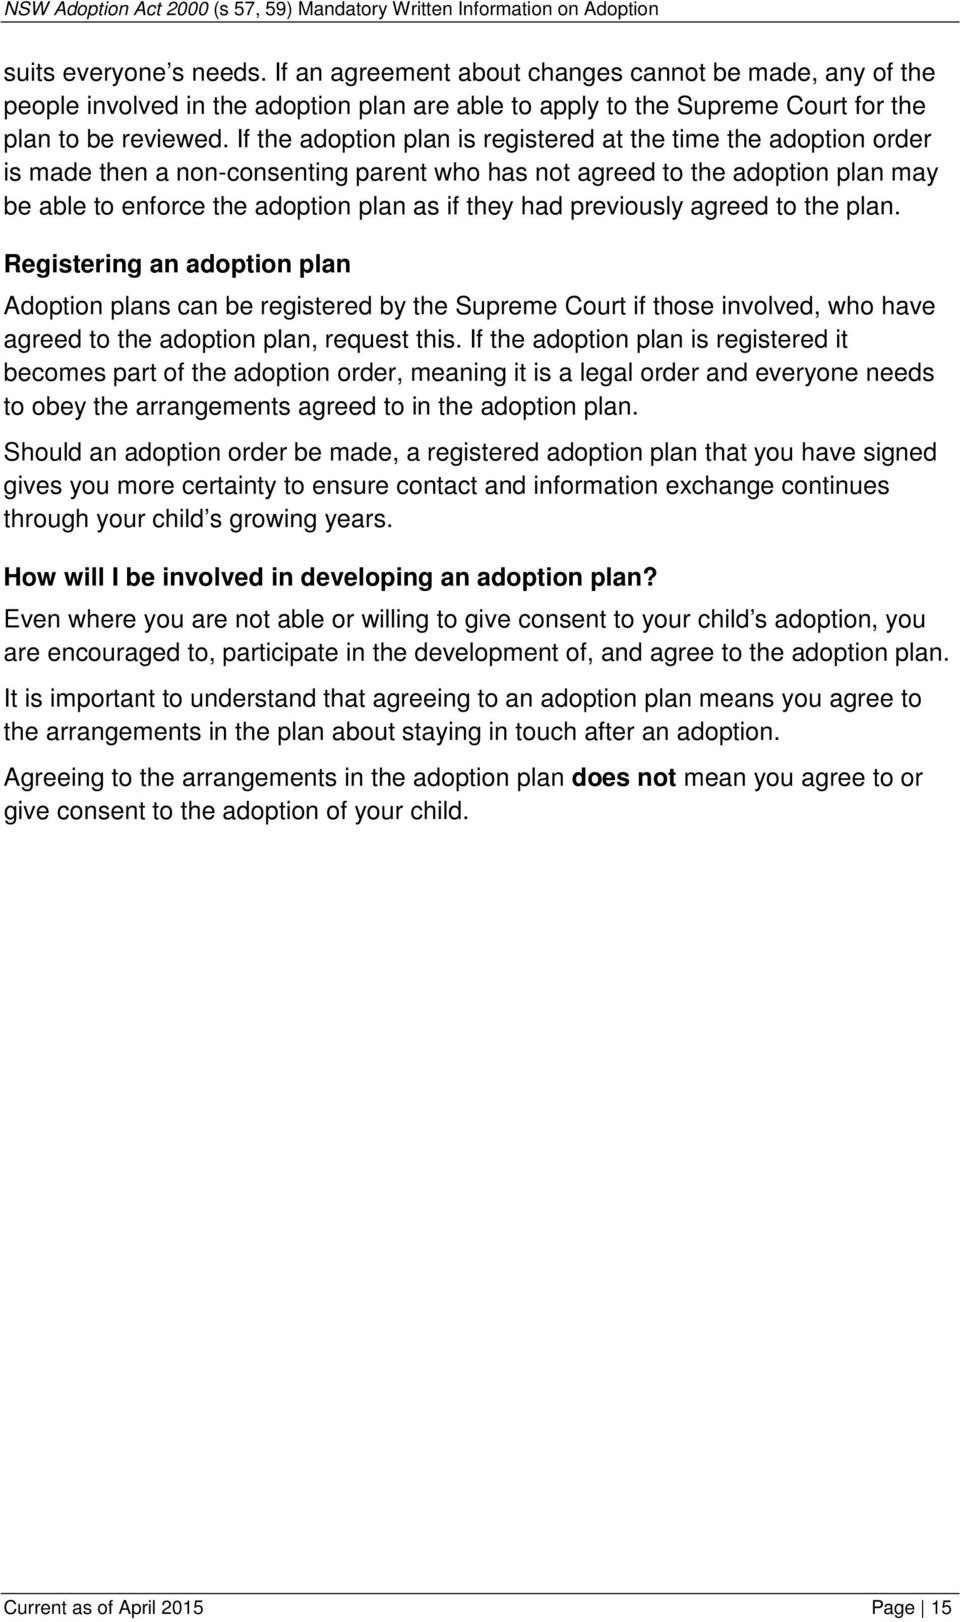 previously agreed to the plan. Registering an adoption plan Adoption plans can be registered by the Supreme Court if those involved, who have agreed to the adoption plan, request this.